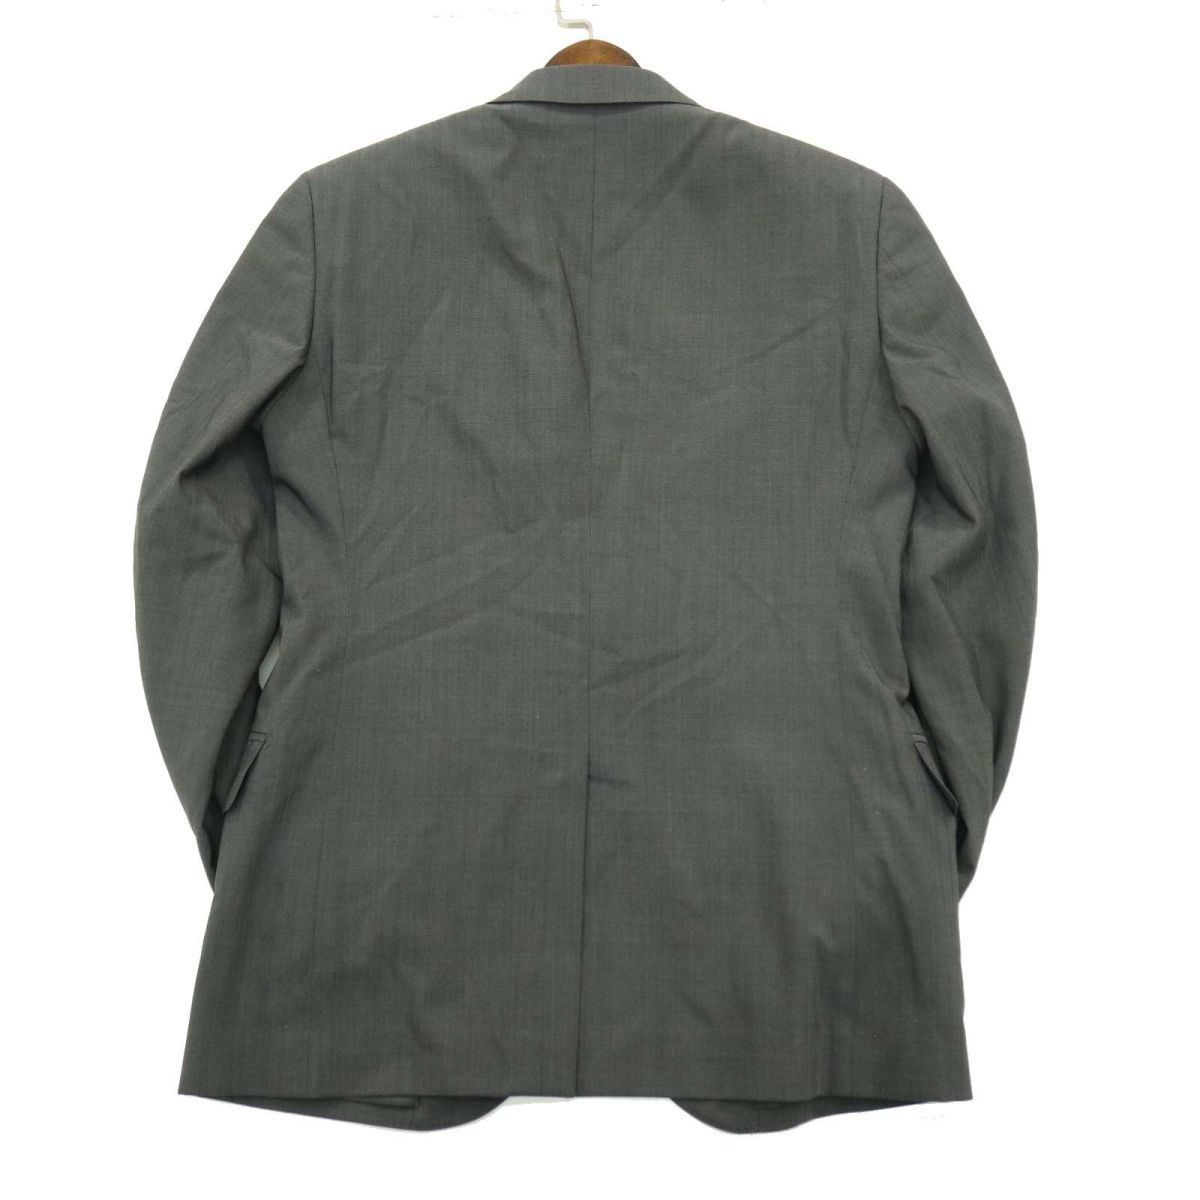 GREEN LABEL RELAXING United Arrows spring summer unlined in the back * silk silk . tailored jacket Sz.44 men's ash bijikajiA3T08667_7#M